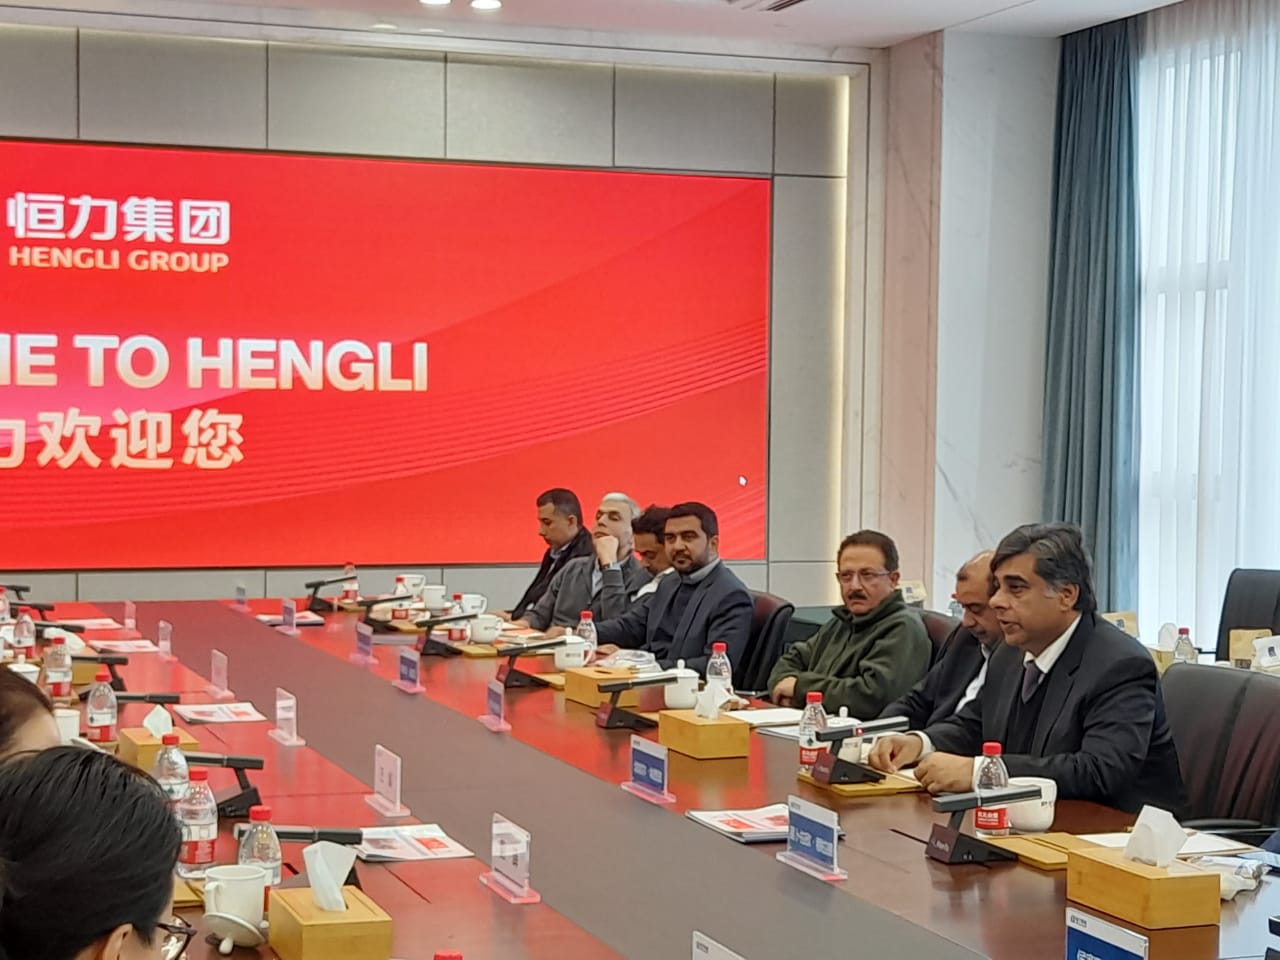 Commerce Minister Dr. Gohar Ejaz Unveils New Collaborative Potential during Visit to Hengli Group Headquarters in China.